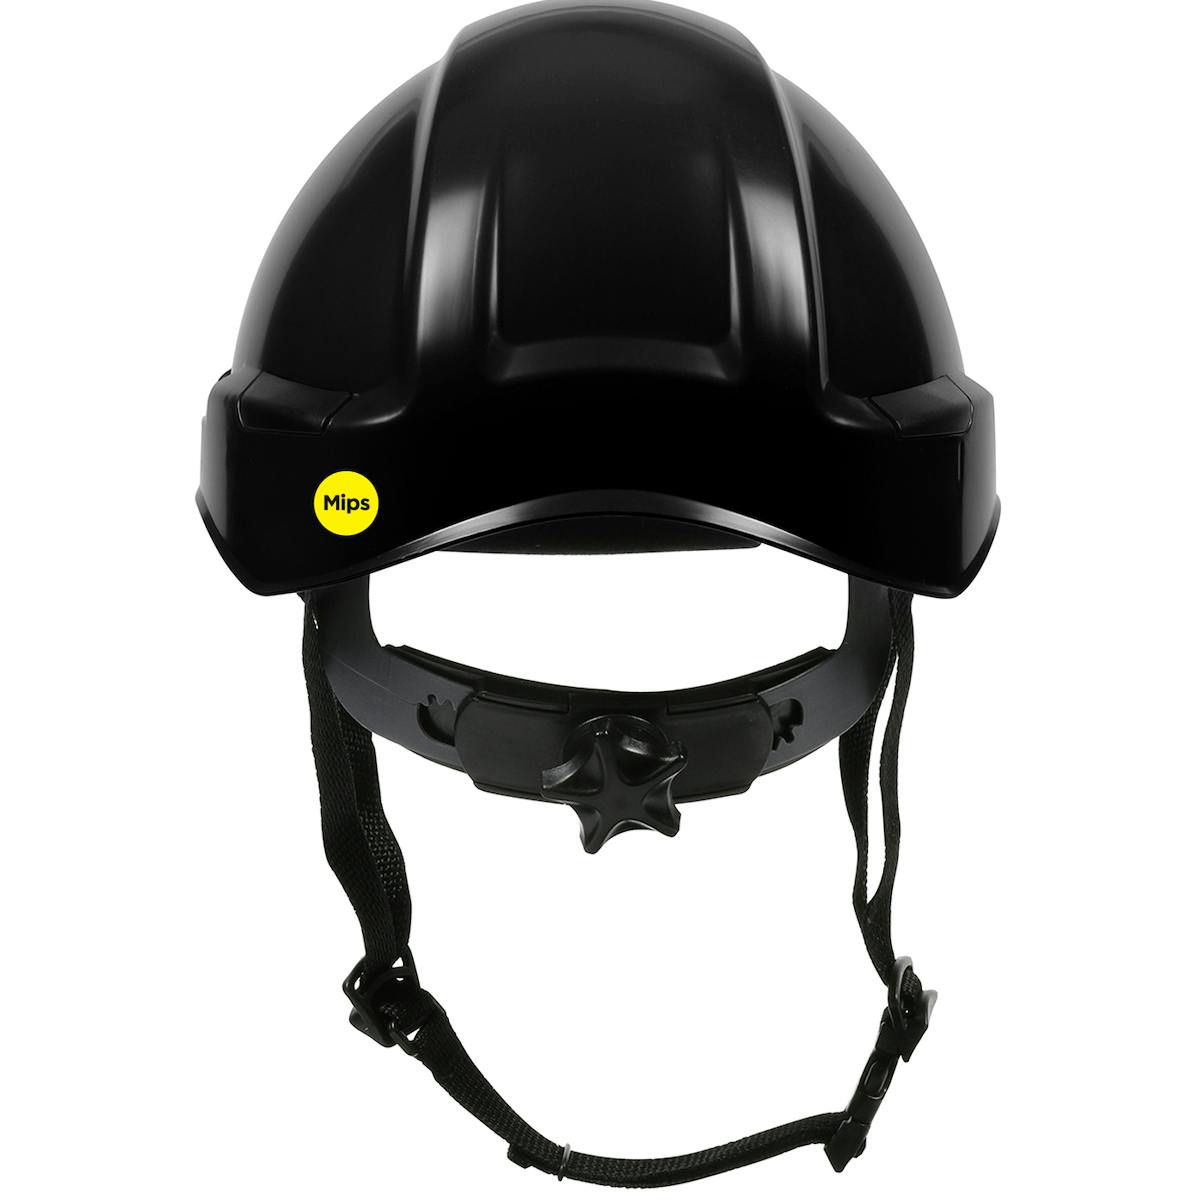 Rocky™ Industrial Climbing Helmet with Mips® Technology, Polycarbonate/ABS Shell, Hi-Density Foam Impact Liner, Nylon Suspension, Wheel Ratchet Adjustment and 4-Point Chin Strap (280-HP142RM)